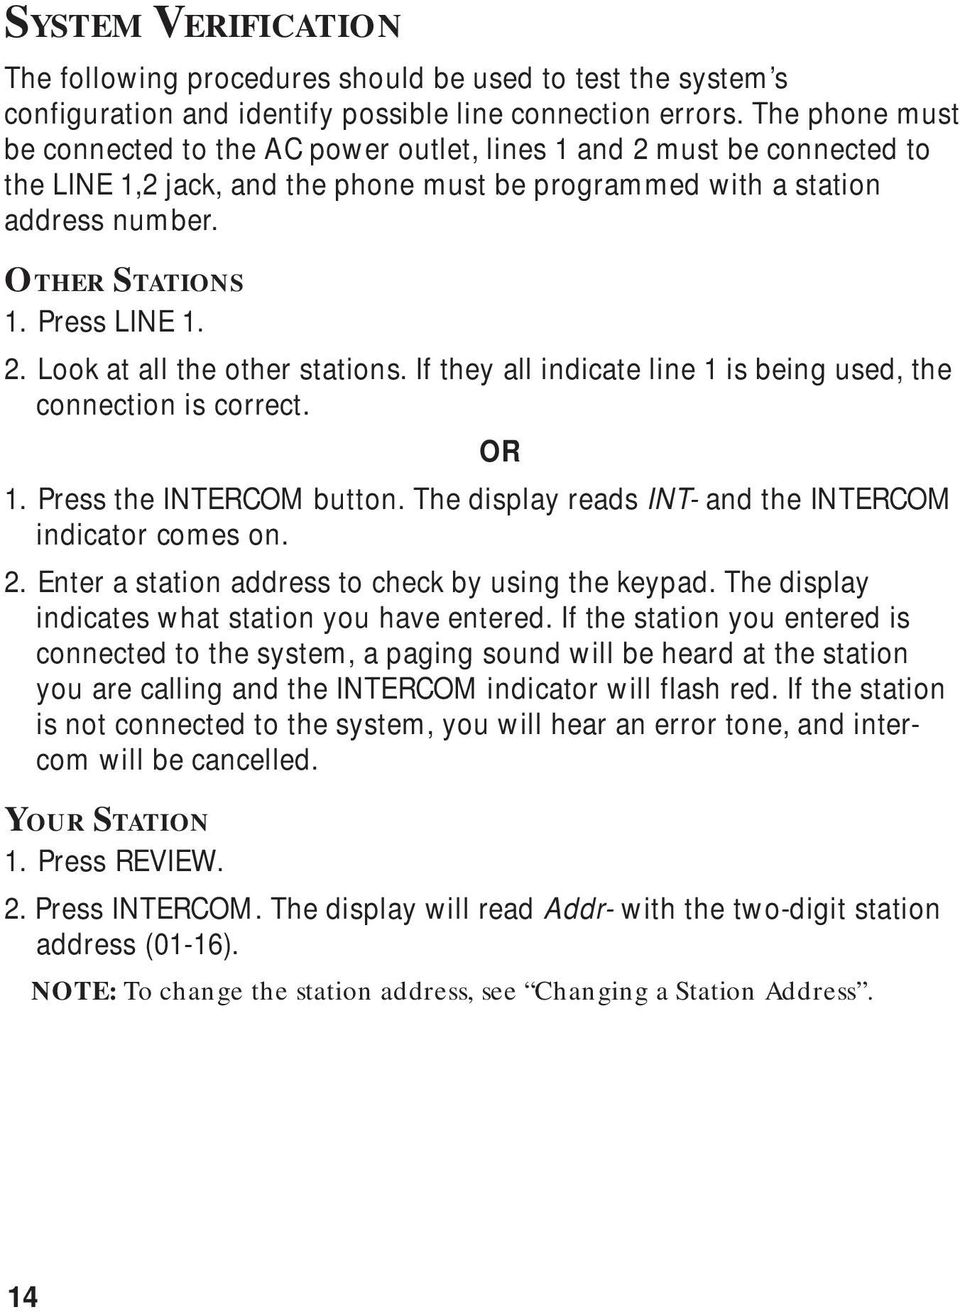 Press LINE 1. 2. Look at all the other stations. If they all indicate line 1 is being used, the connection is correct. OR 1. Press the INTERCOM button.